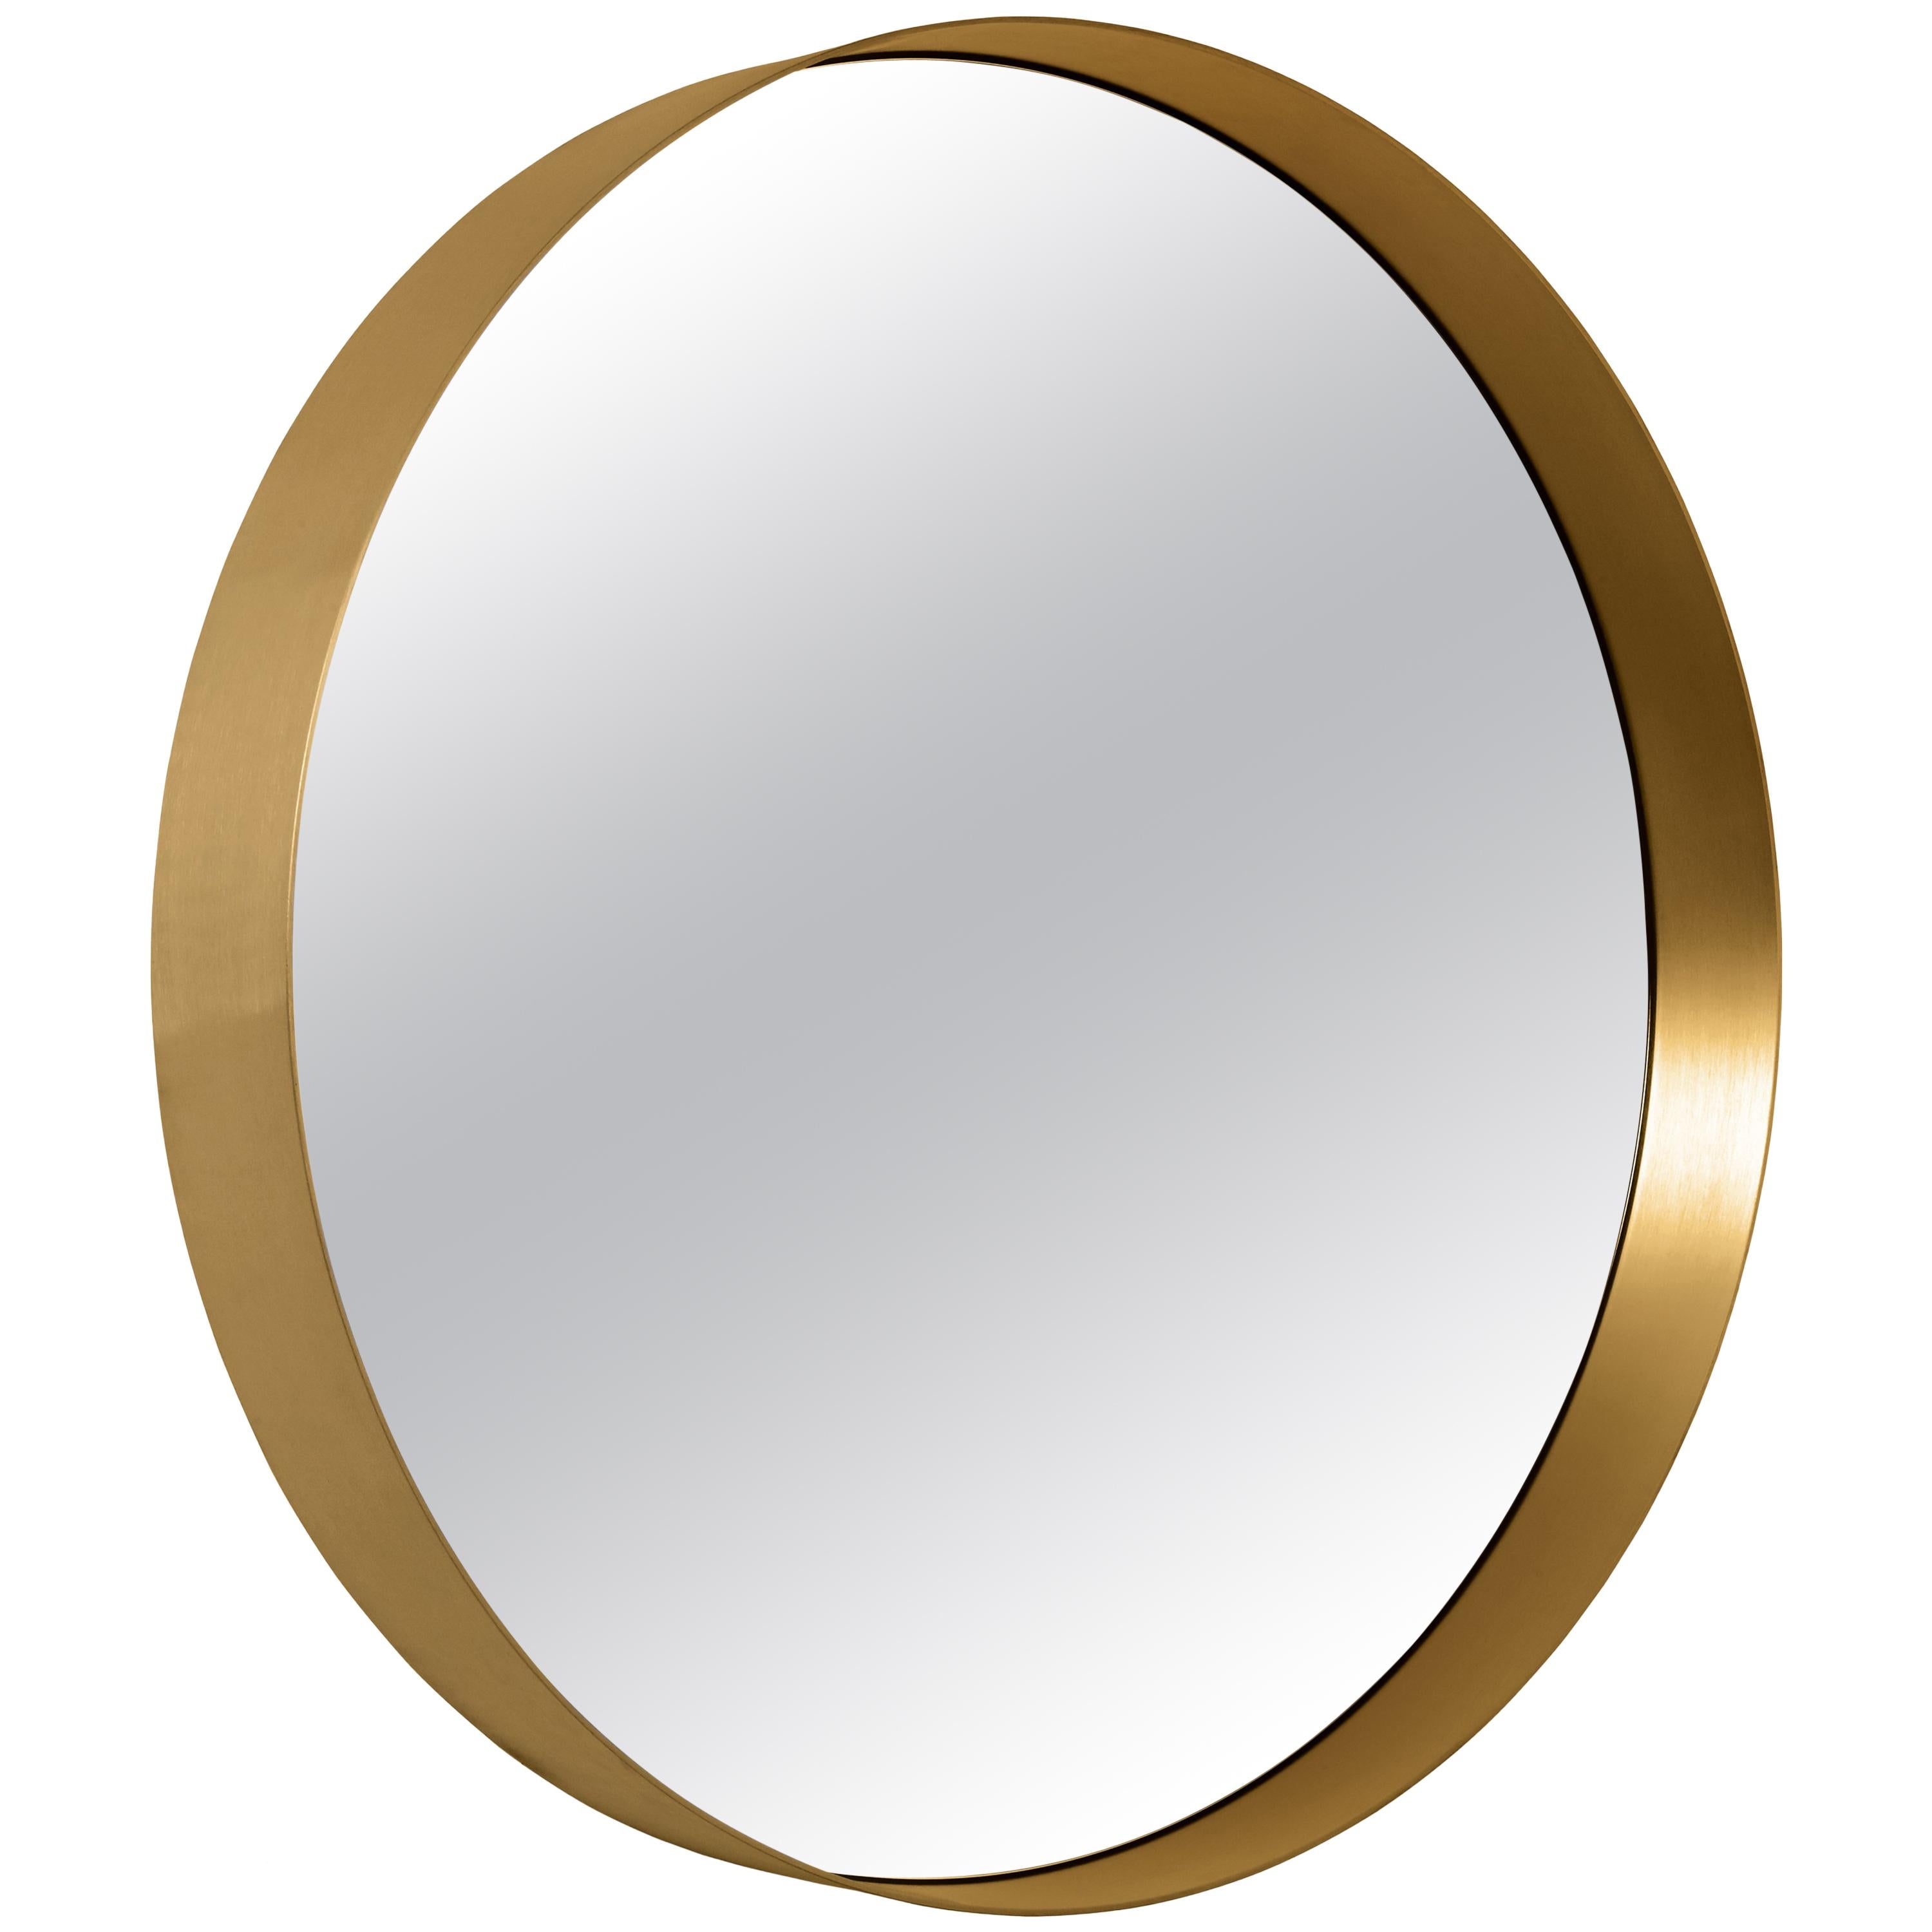 ClassiCon Cypris Round Mirror in Brass by Nina Mair